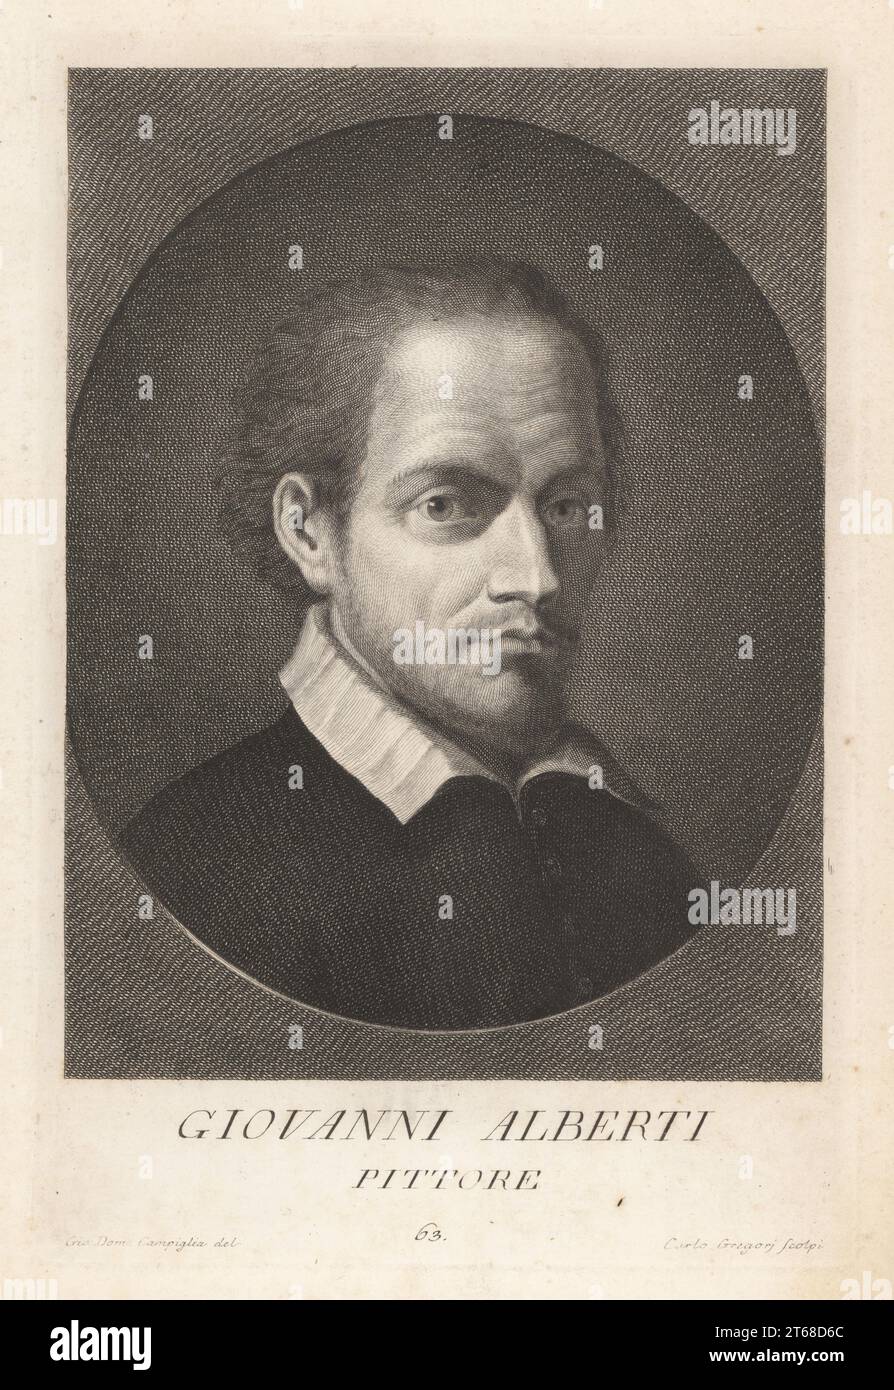 Giovanni Alberti, Italian painter, poet and art critic, 15581601. Known for his perspective painting (quadratura) in landscapes. Brother of Cherubino Alberti. Copperplate engraving by Carlo Gregori after Giovanni Domenico Campiglia after a self portrait by the artist from Francesco Moucke's Museo Florentino (Museum Florentinum), Serie di Ritratti de Pittori (Series of Portraits of Painters) stamperia Mouckiana, Florence, 1752-62. Stock Photo